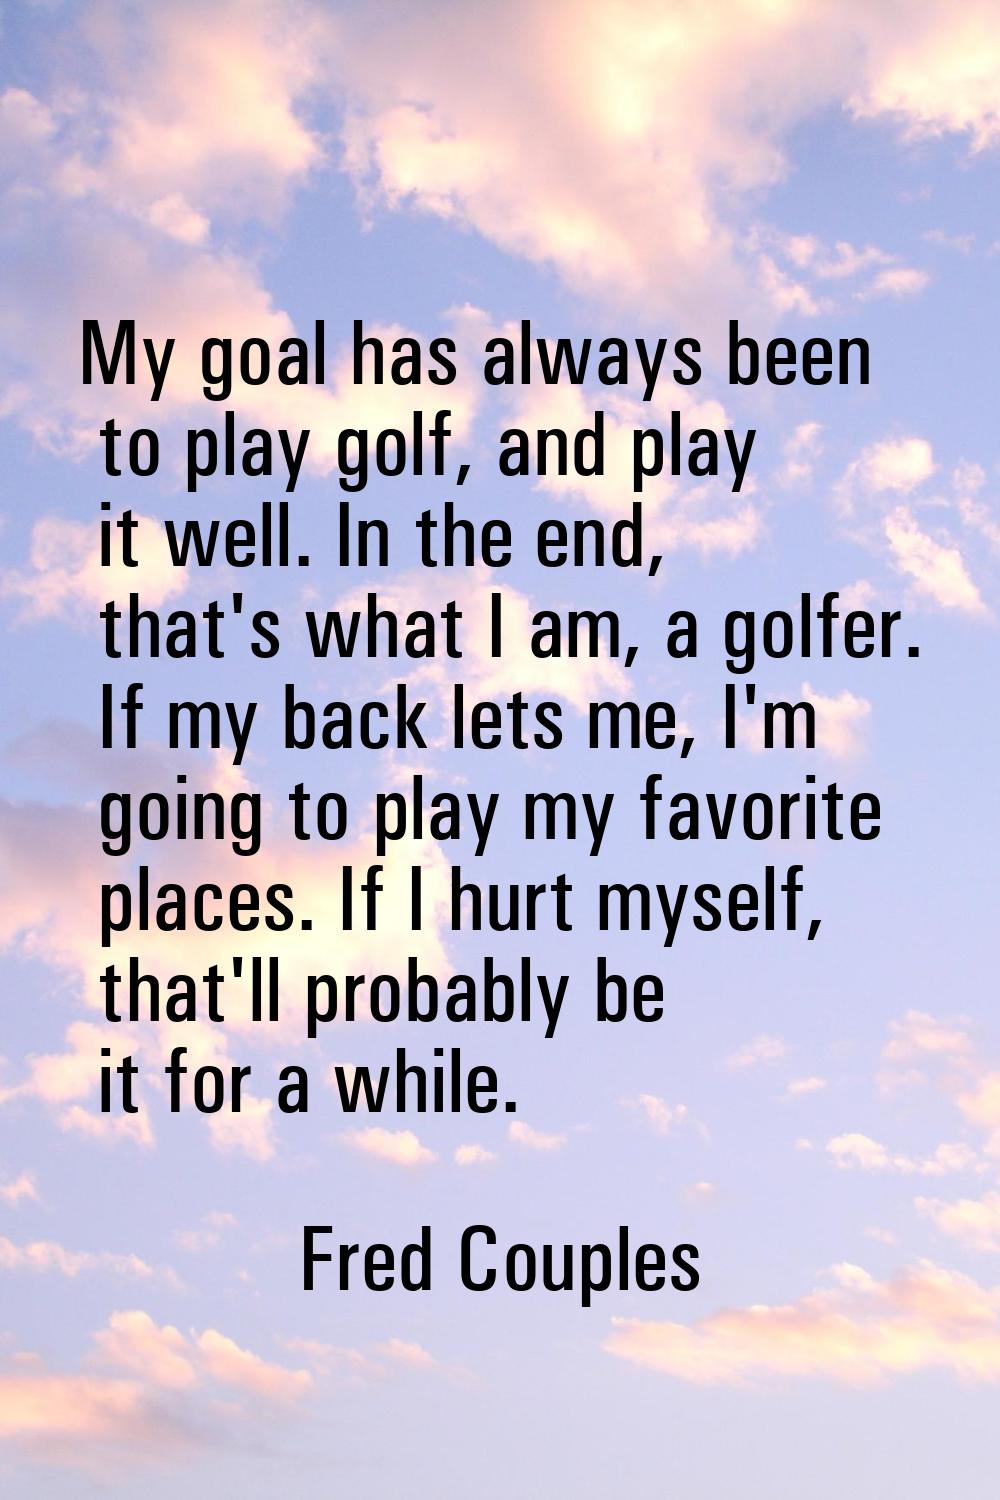 My goal has always been to play golf, and play it well. In the end, that's what I am, a golfer. If 